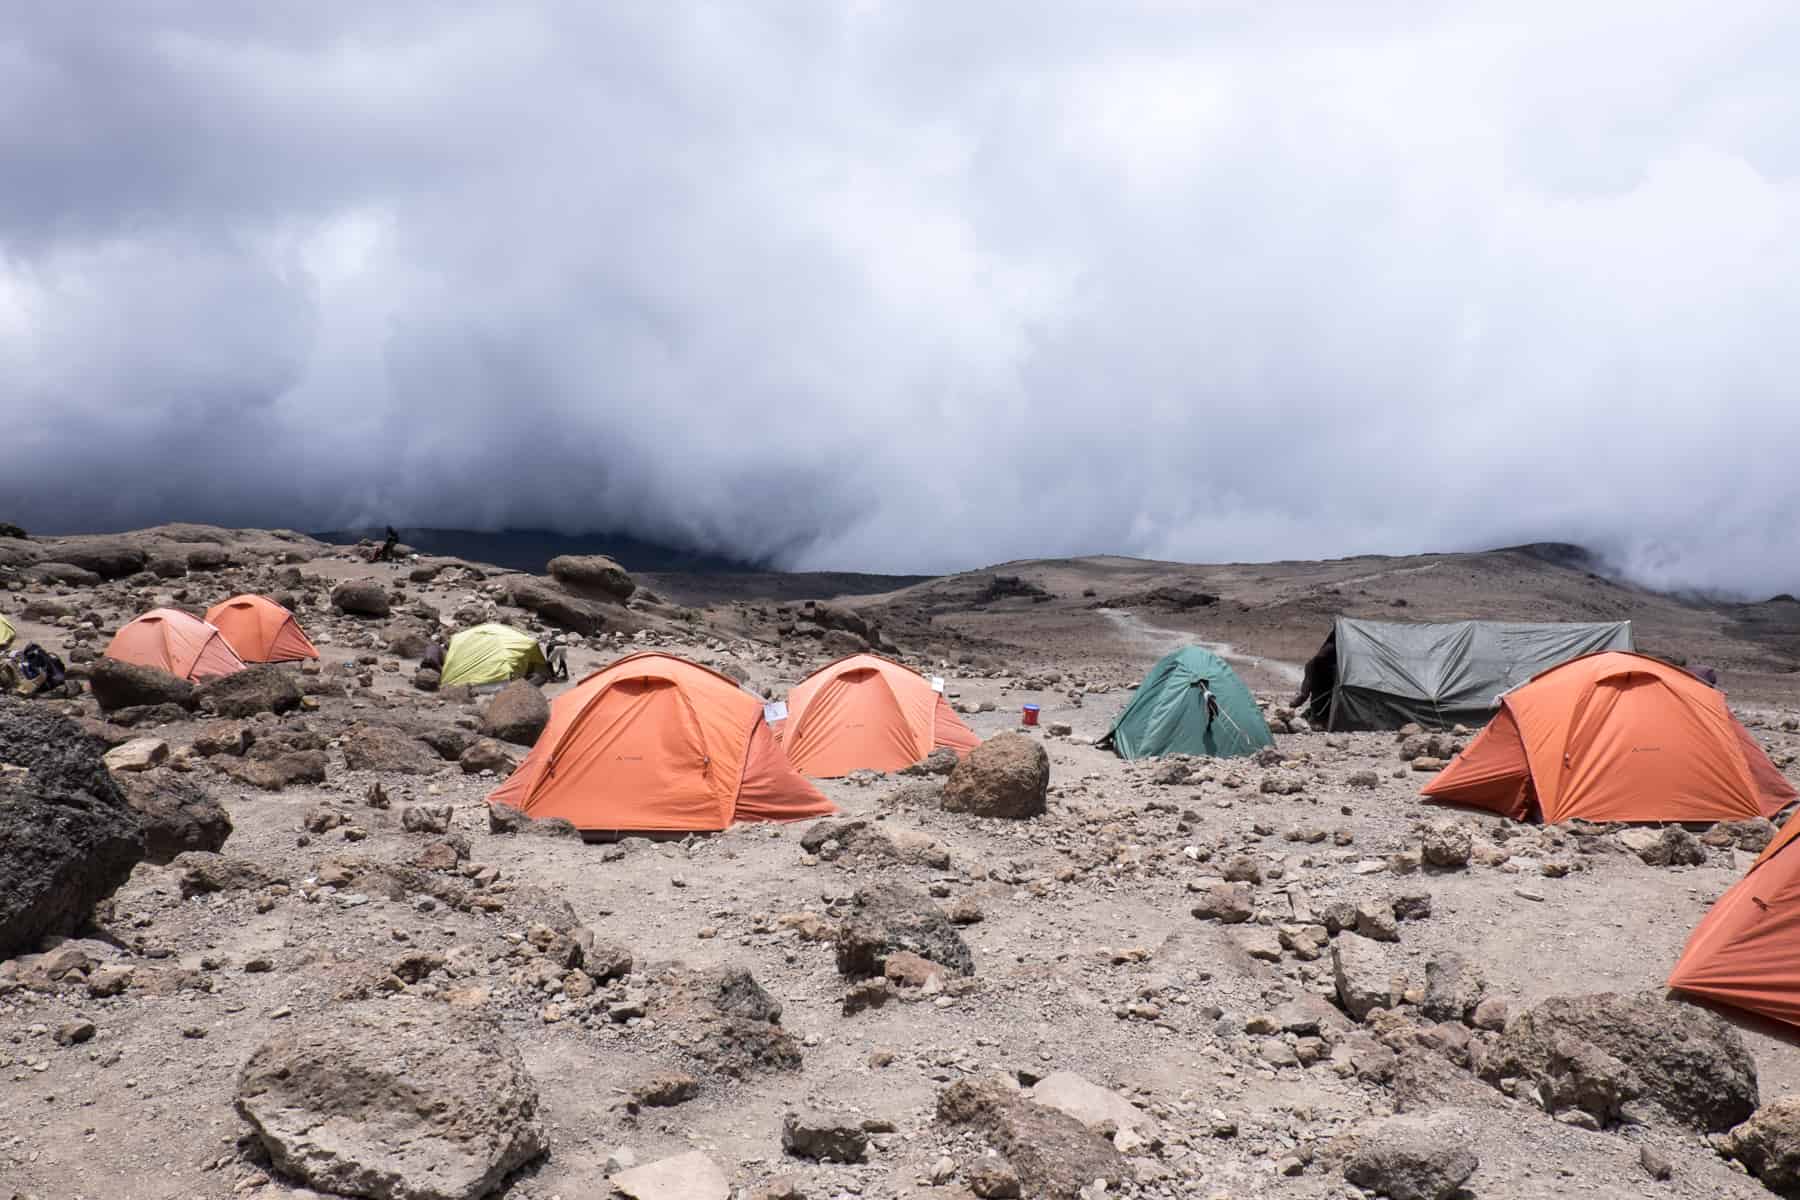 A campsite of orange and green tents on rocky ground on Mount Kilimanjaro.